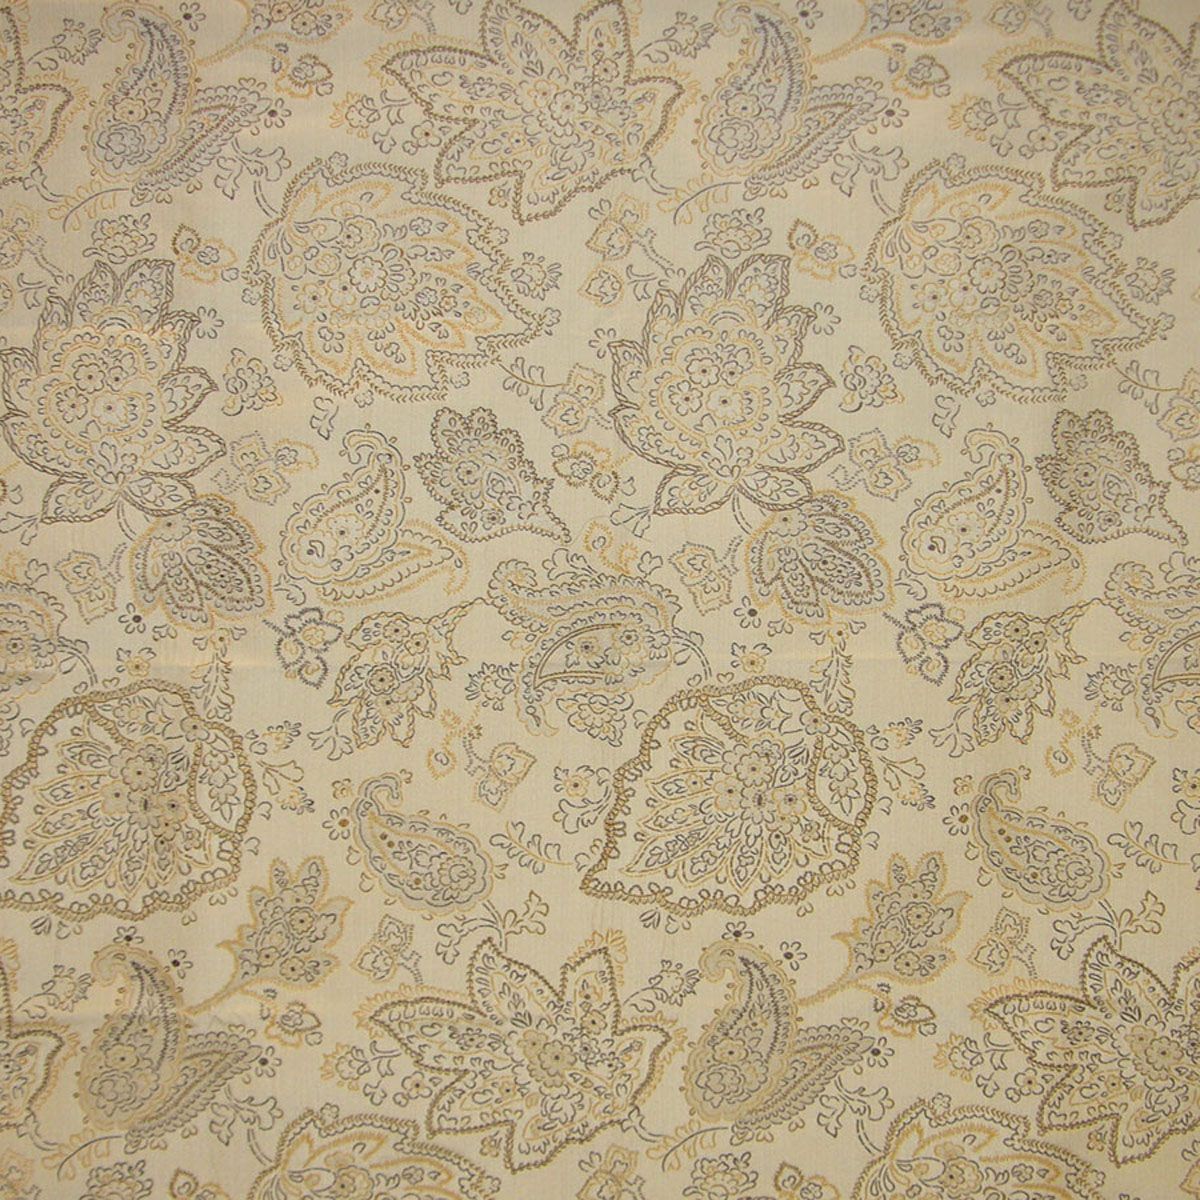 Camargue fabric in amber color - pattern number MT 00013566 - by Scalamandre in the Old World Weavers collection